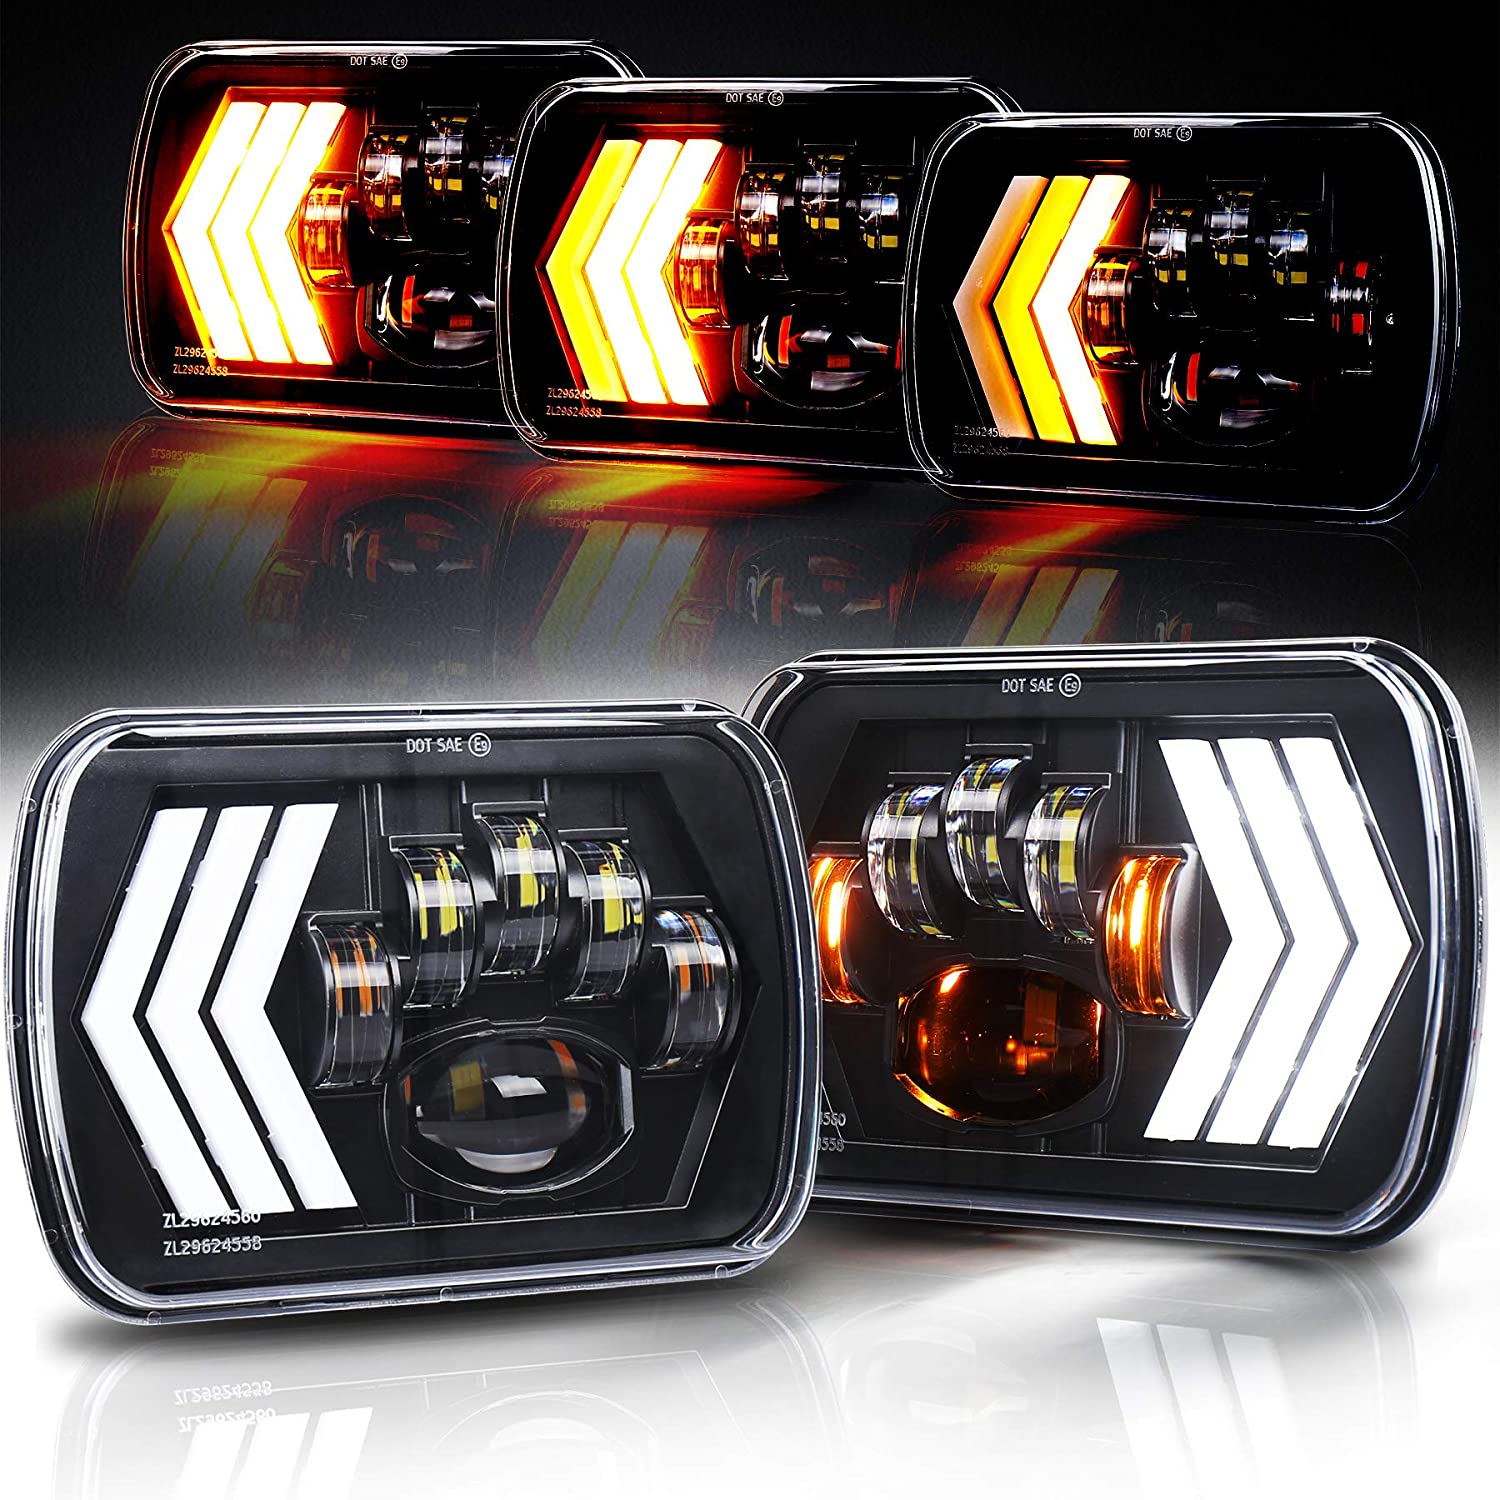 7x6 Led Headlights 5x7 Seam Beam with White DRL Amber Background & Sequential Turn Signal Light for Cherokee XJ Wrangler YJ Toyota GMC Truck